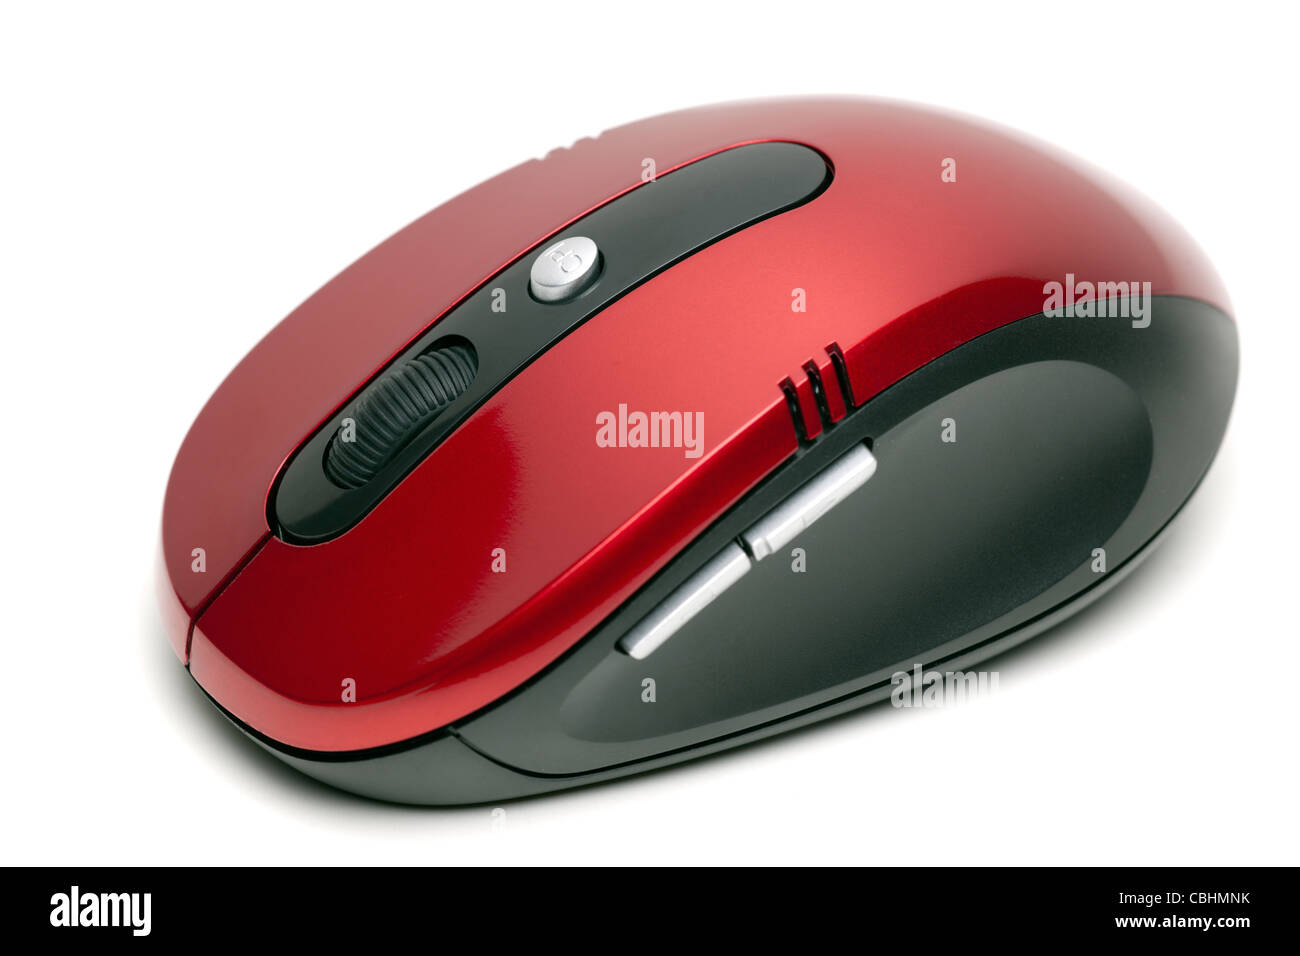 Six button wireless controlled red and black computer mouse Stock Photo